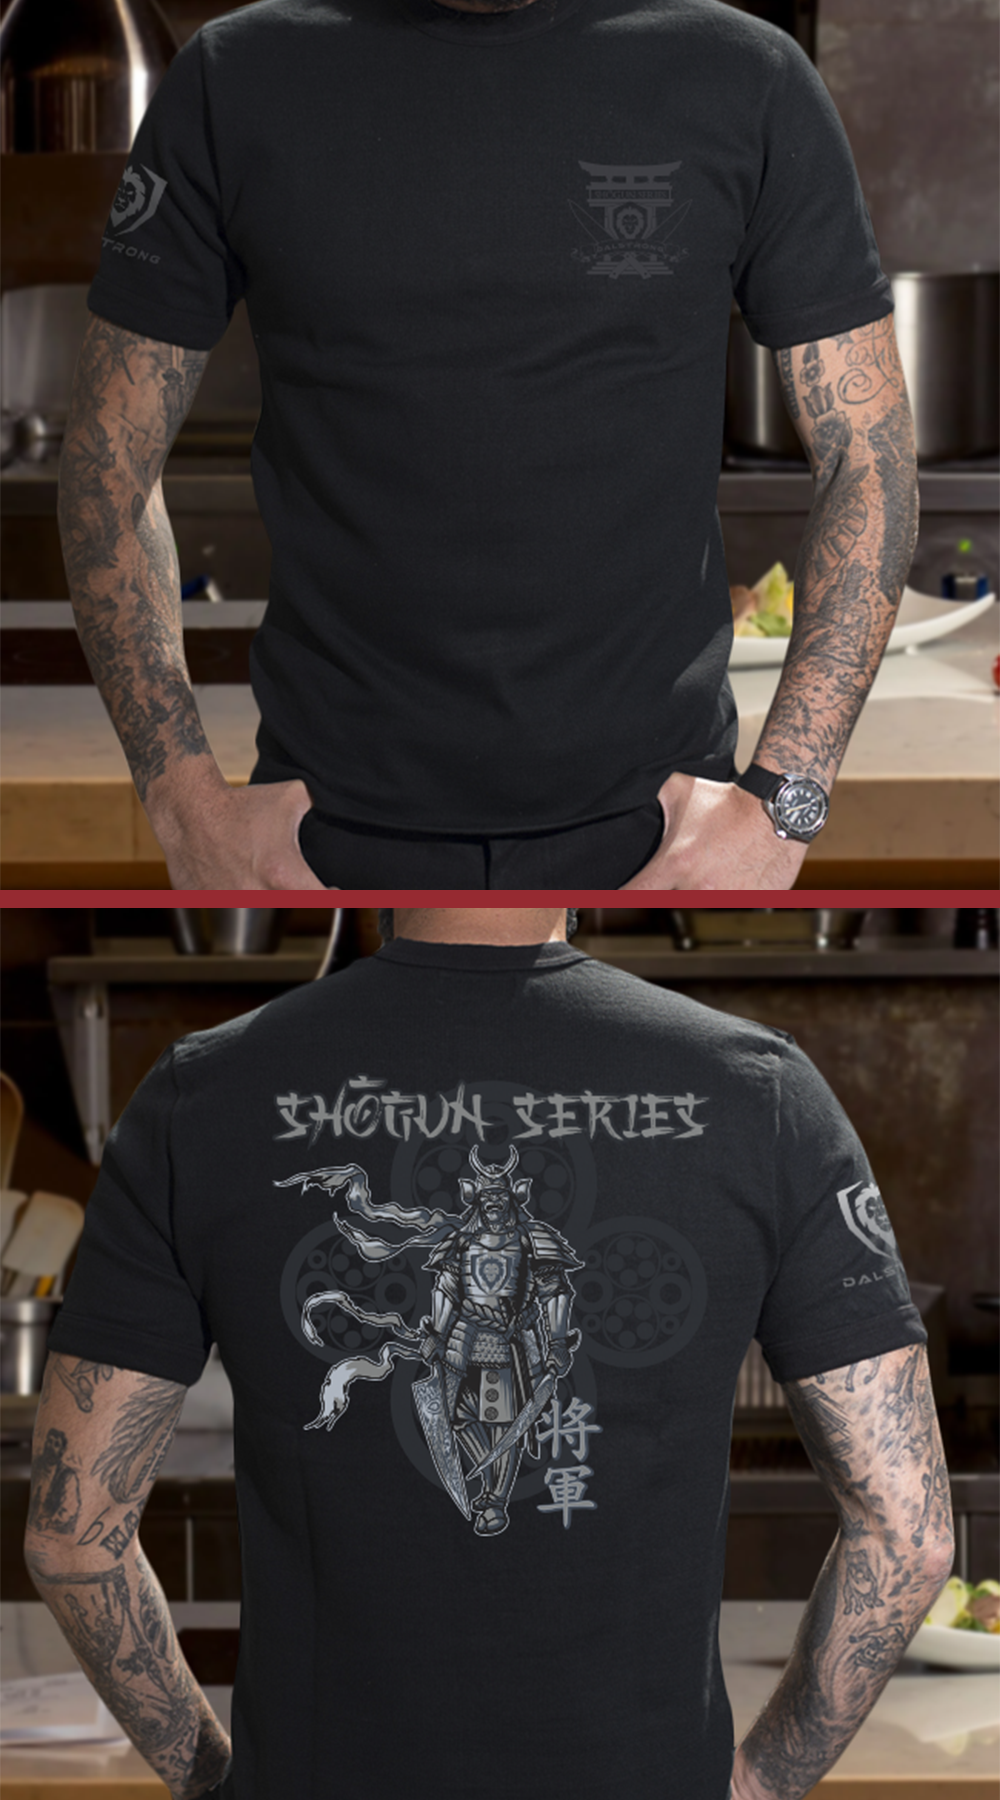 Dalstrong the shogun series regal warrior tee black front and back preview.